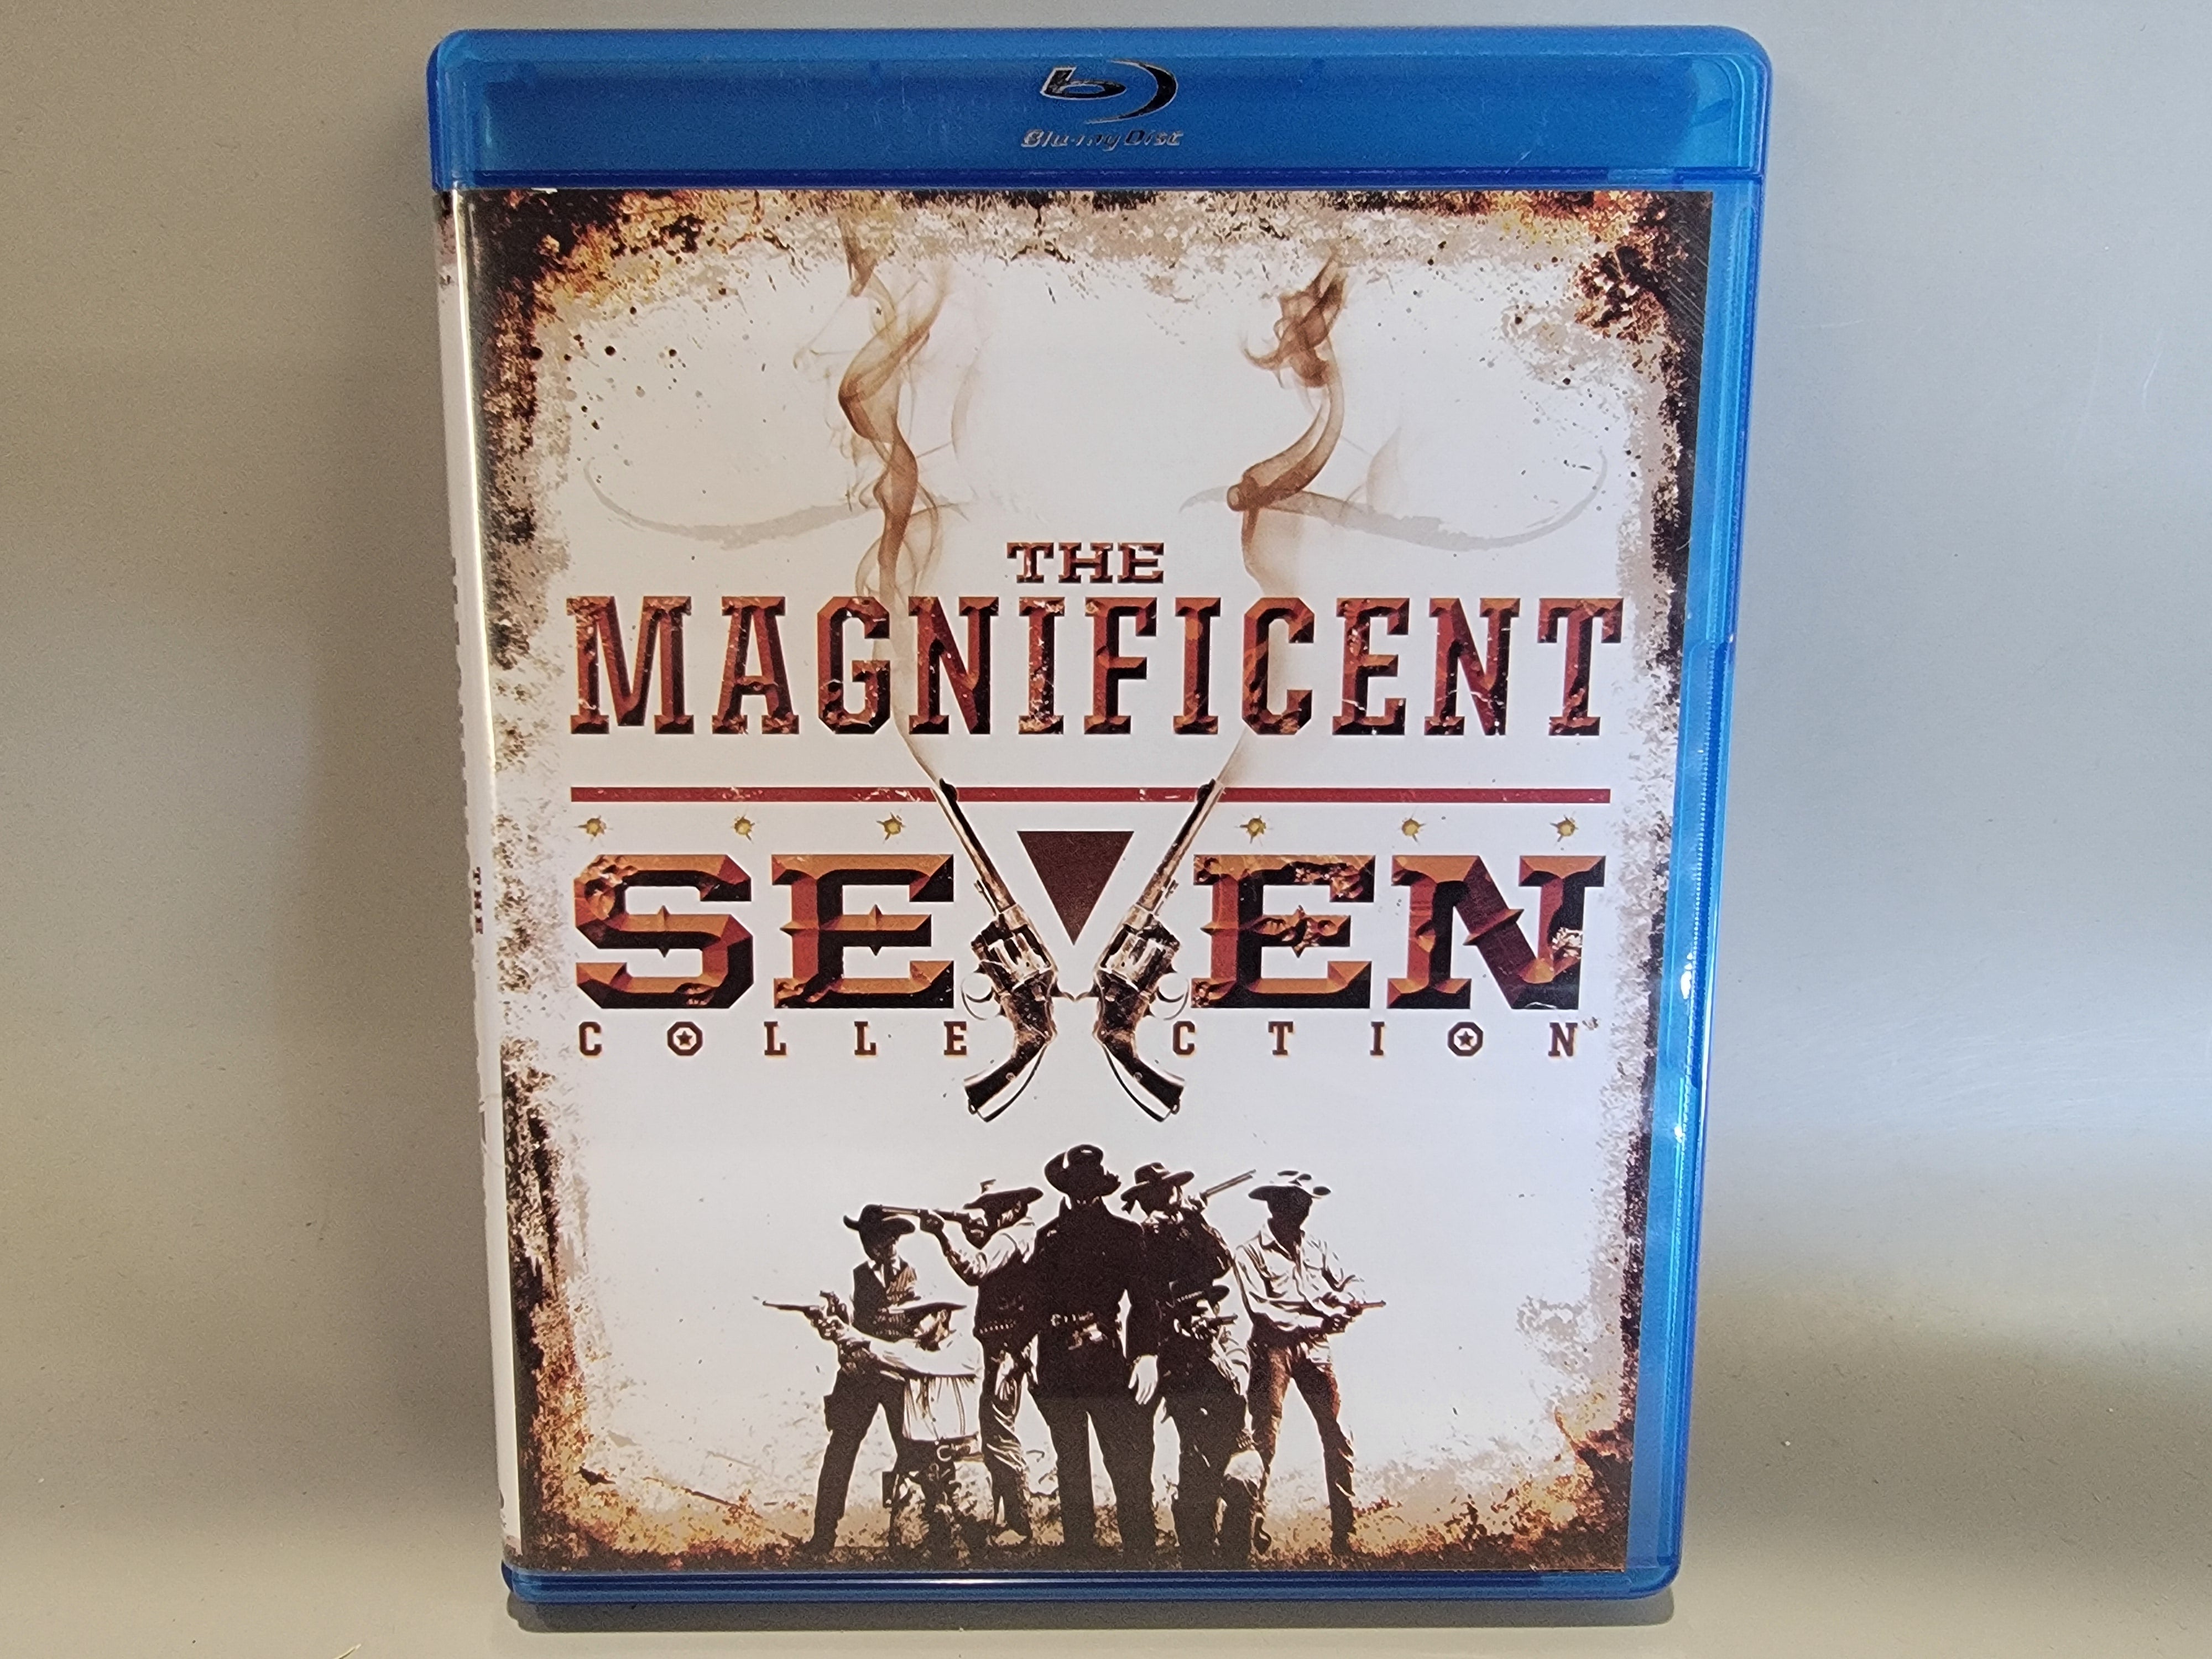 THE MAGNIFICENT SEVEN COLLECTION BLU-RAY [USED]